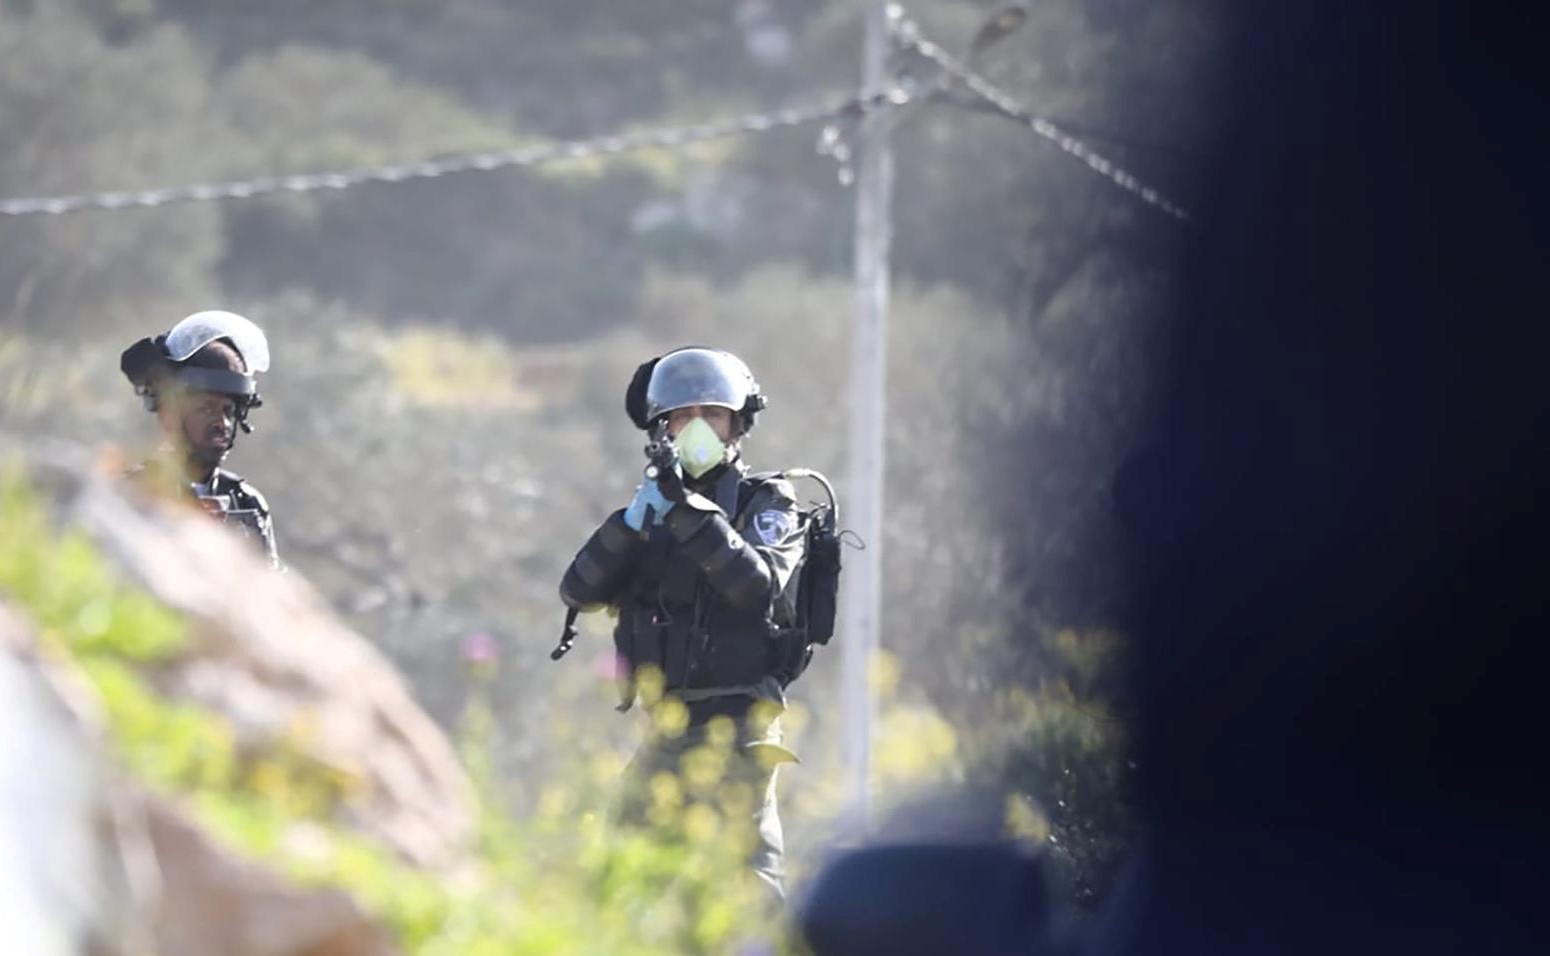 Israeli forces fire at Palestinians on Jabal al-'Arma, last Wednesday, March 11.